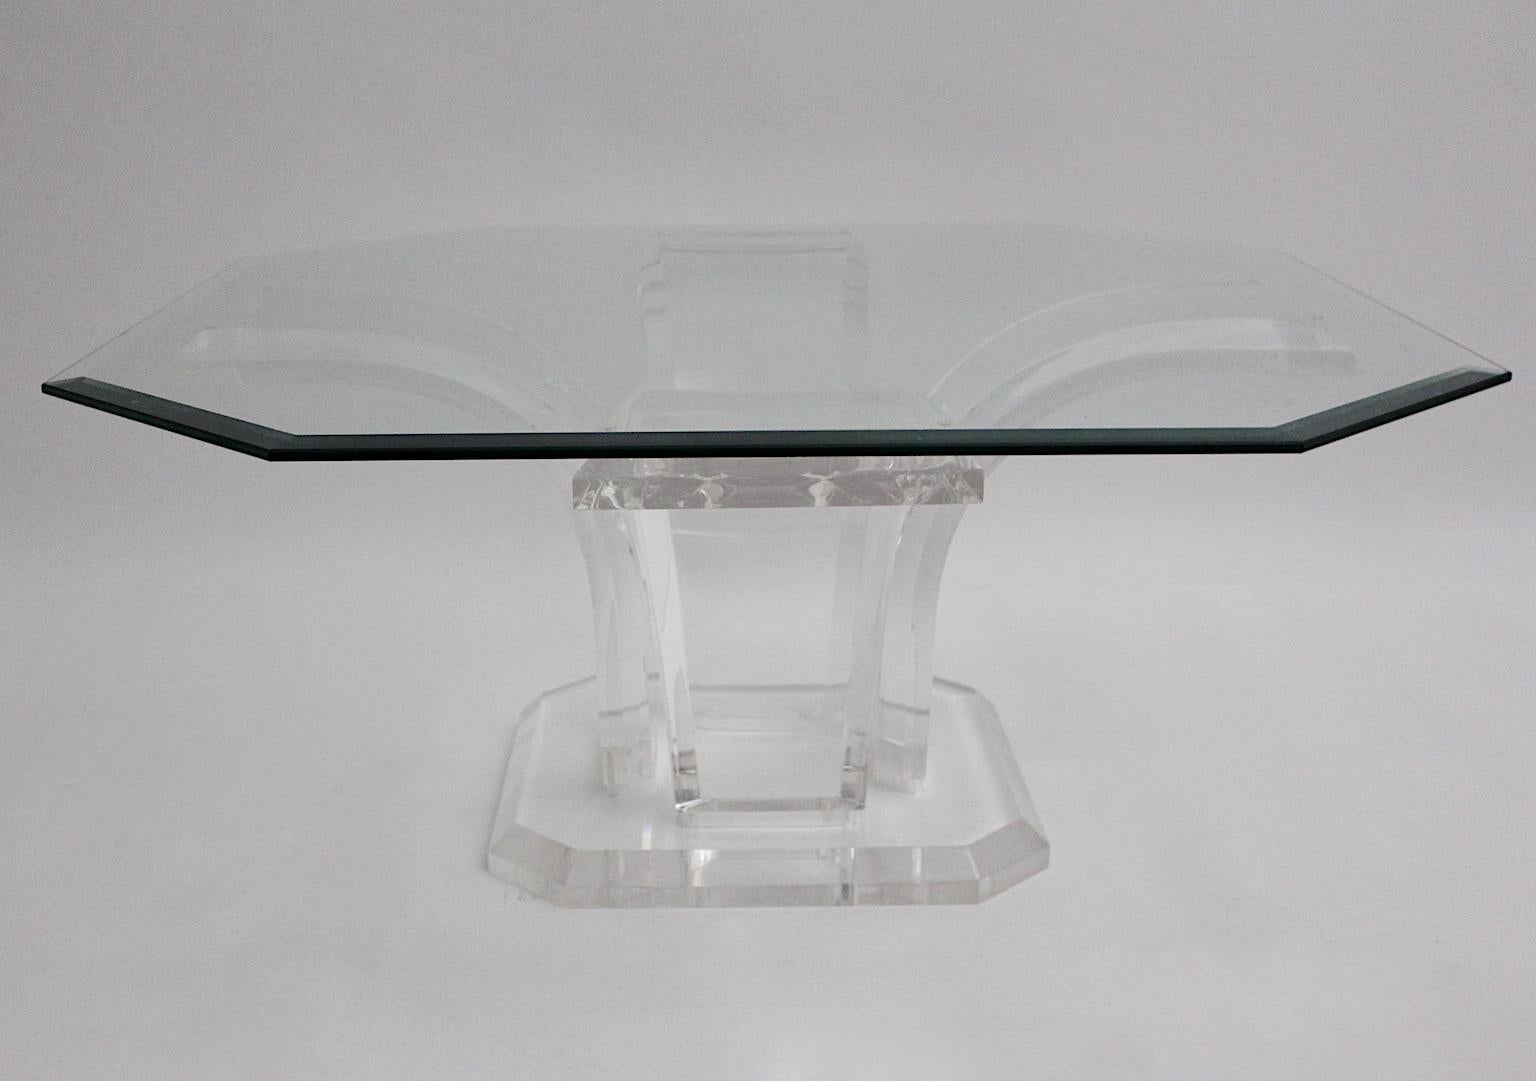 Space Age Vintage Rectangular Transparent Lucite Glass Coffee Table circa 1970 For Sale 4